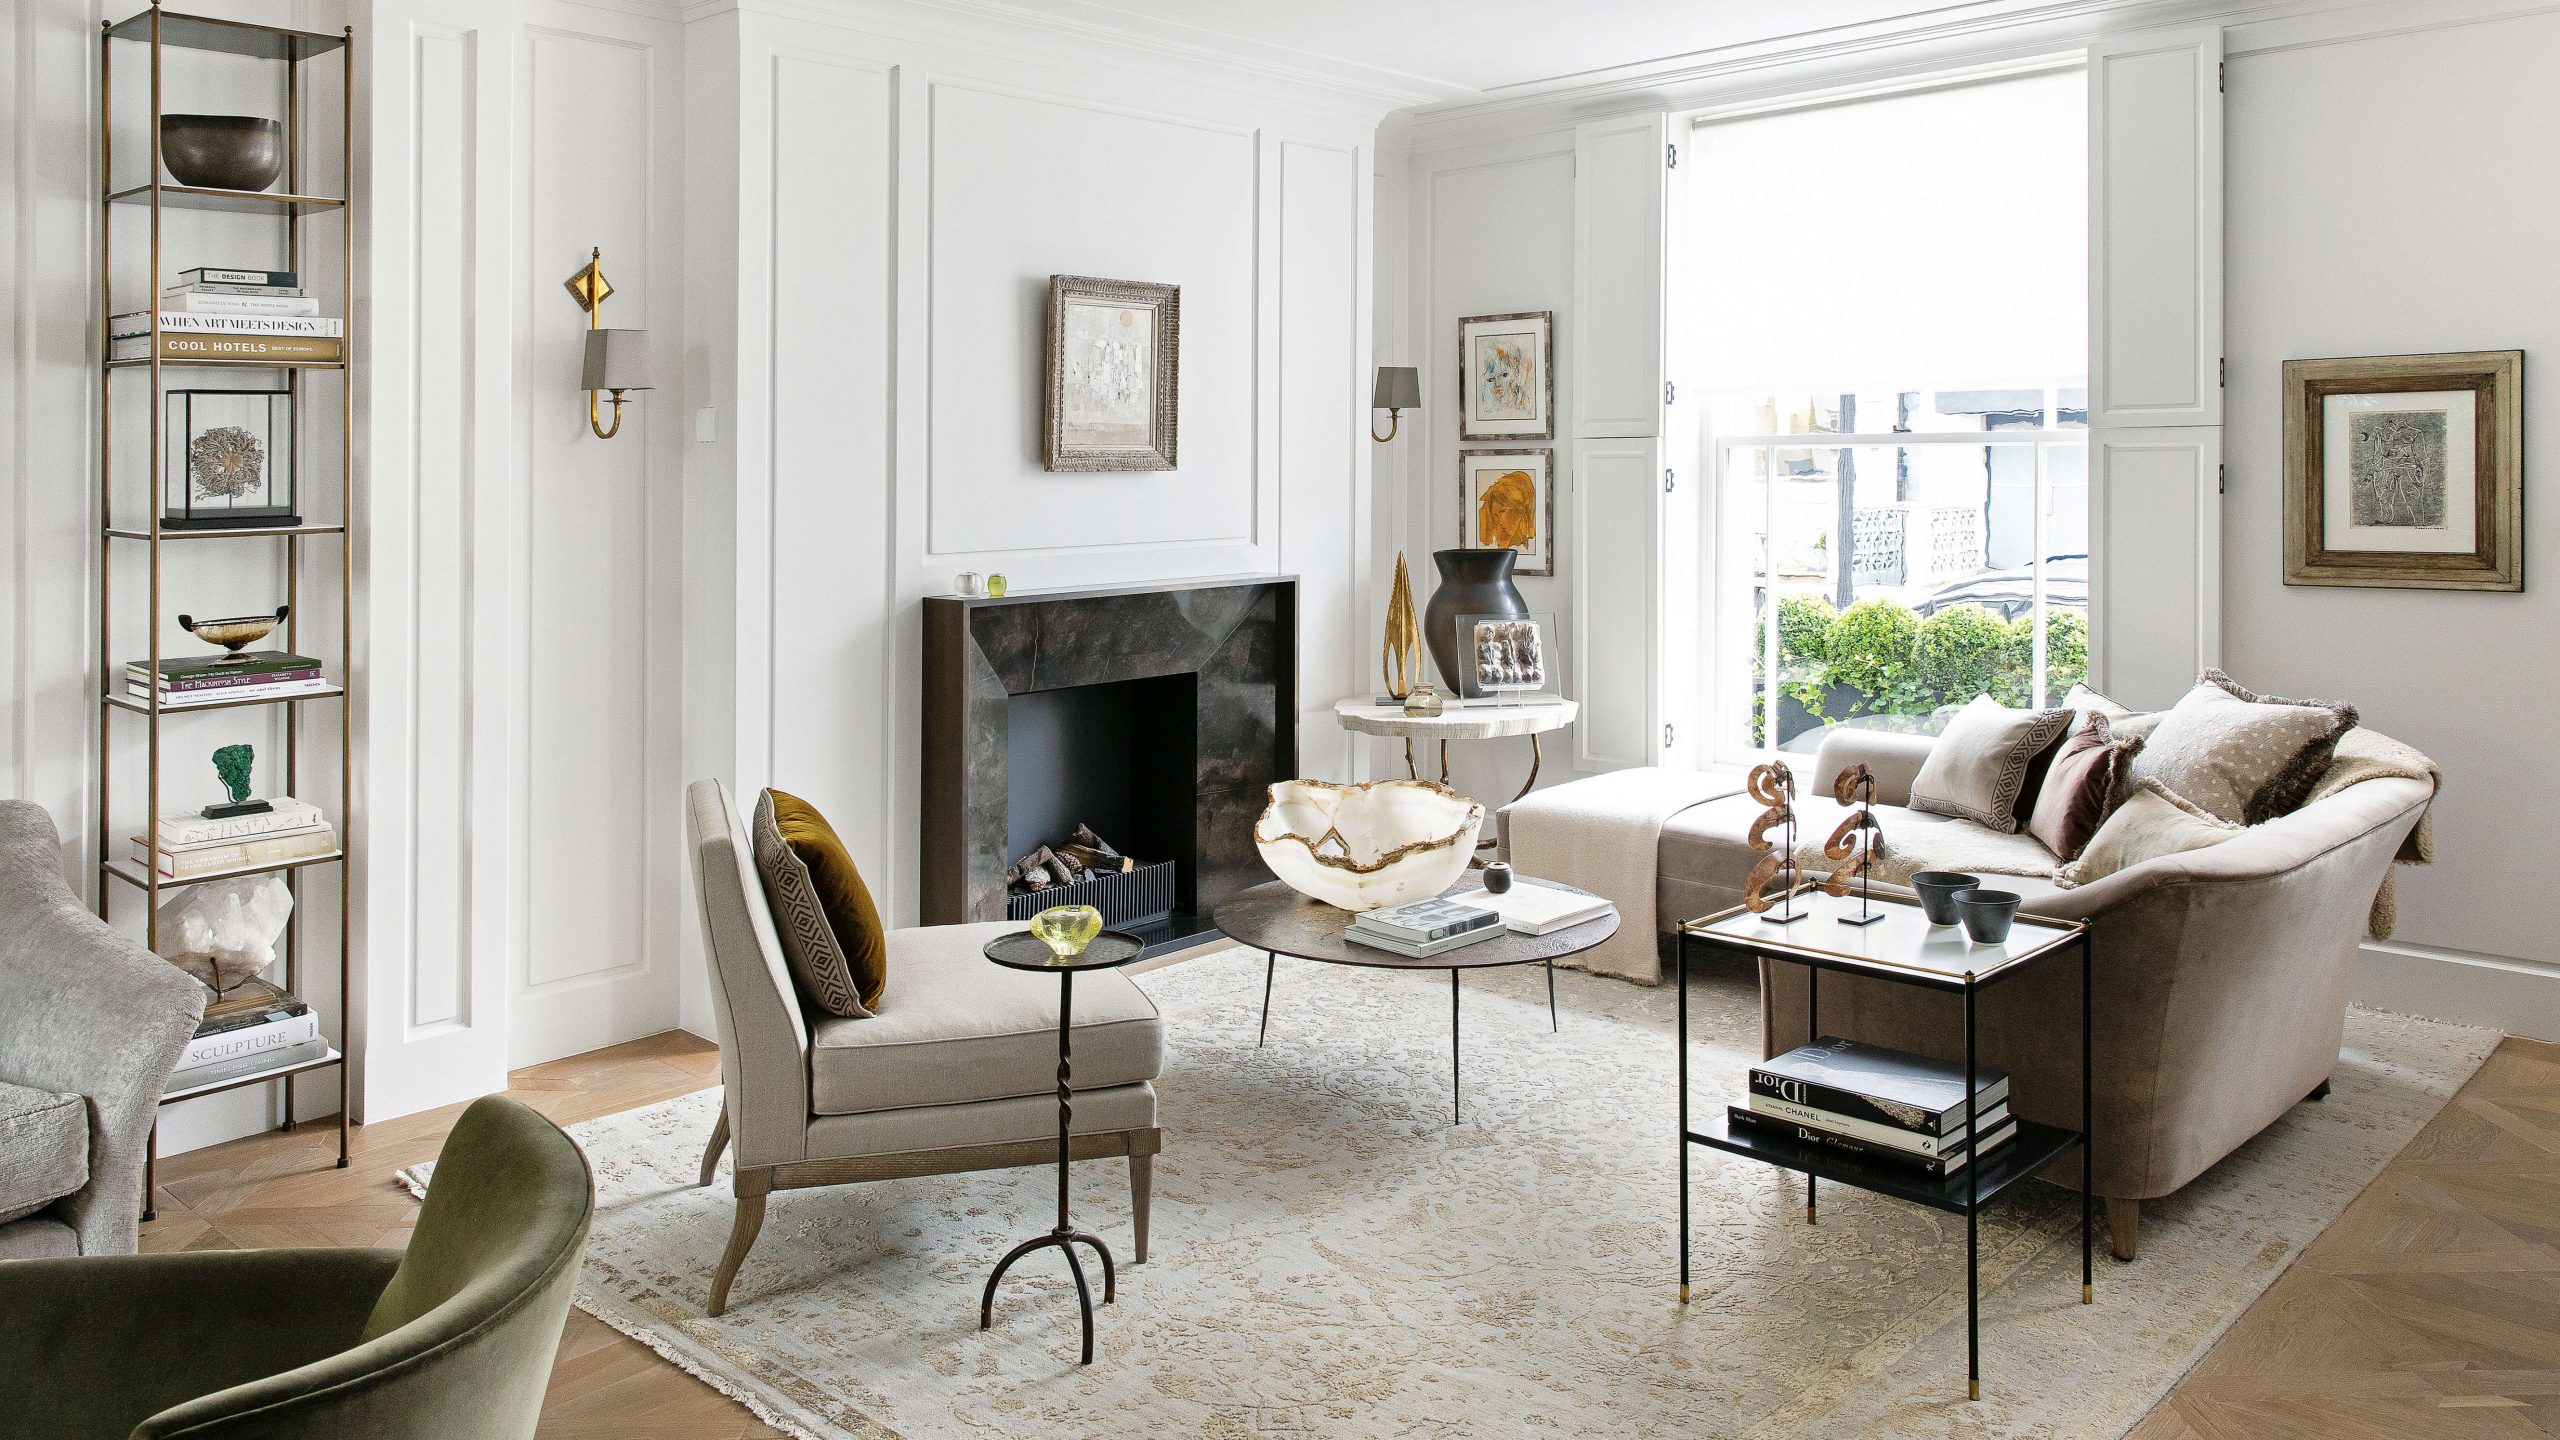 living room fireplace ideas – from style to placement